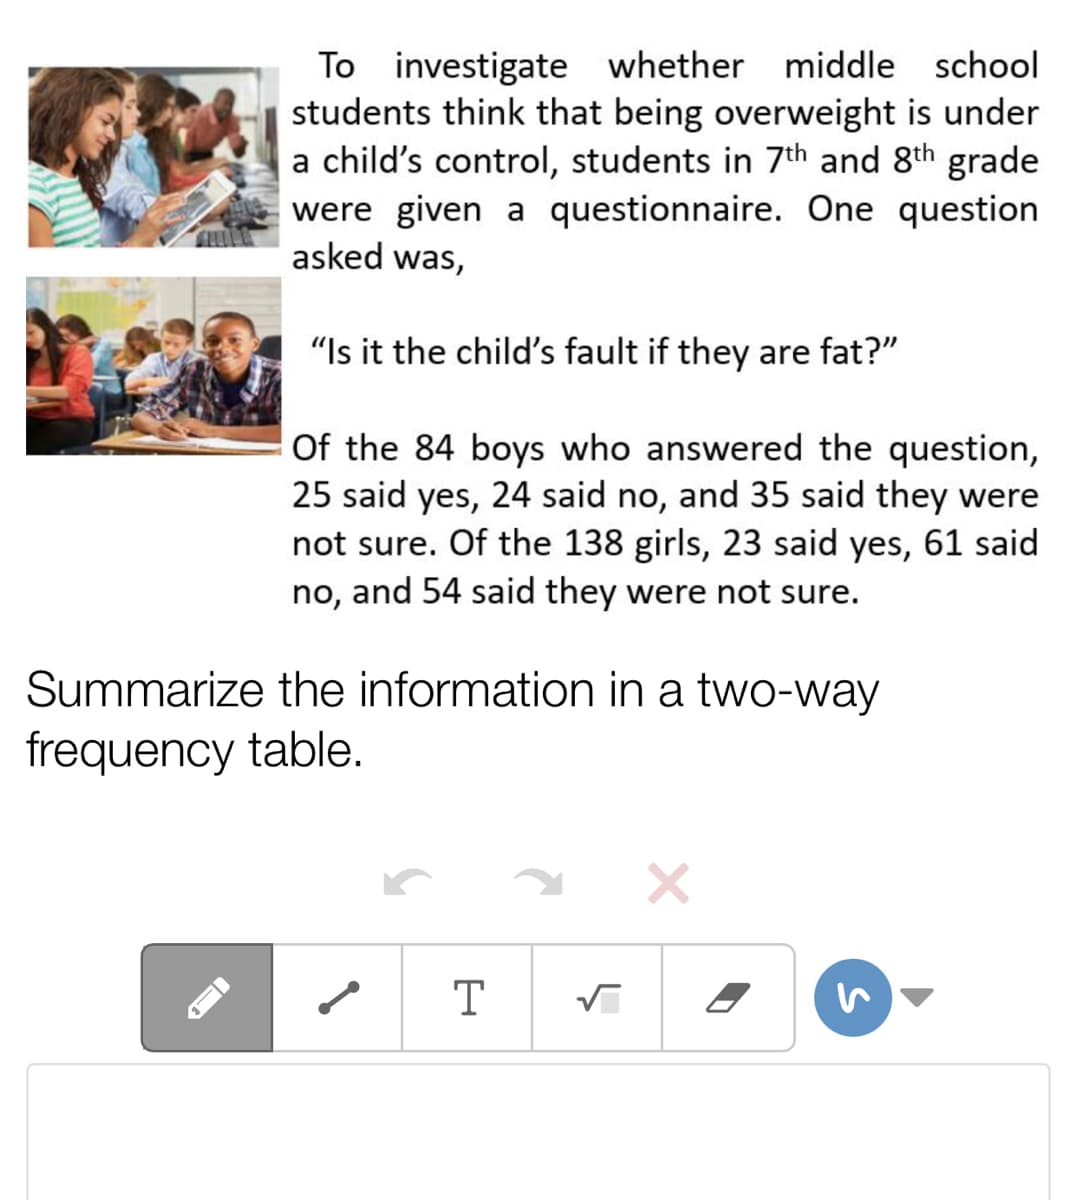 To investigate whether middle school
students think that being overweight is under
a child's control, students in 7th and 8th grade
were given a questionnaire. One question
asked was,
"Is it the child's fault if they are fat?"
Of the 84 boys who answered the question,
25 said yes, 24 said no, and 35 said they were
not sure. Of the 138 girls, 23 said yes, 61 said
no, and 54 said they were not sure.
Summarize the information in a two-way
frequency table.
